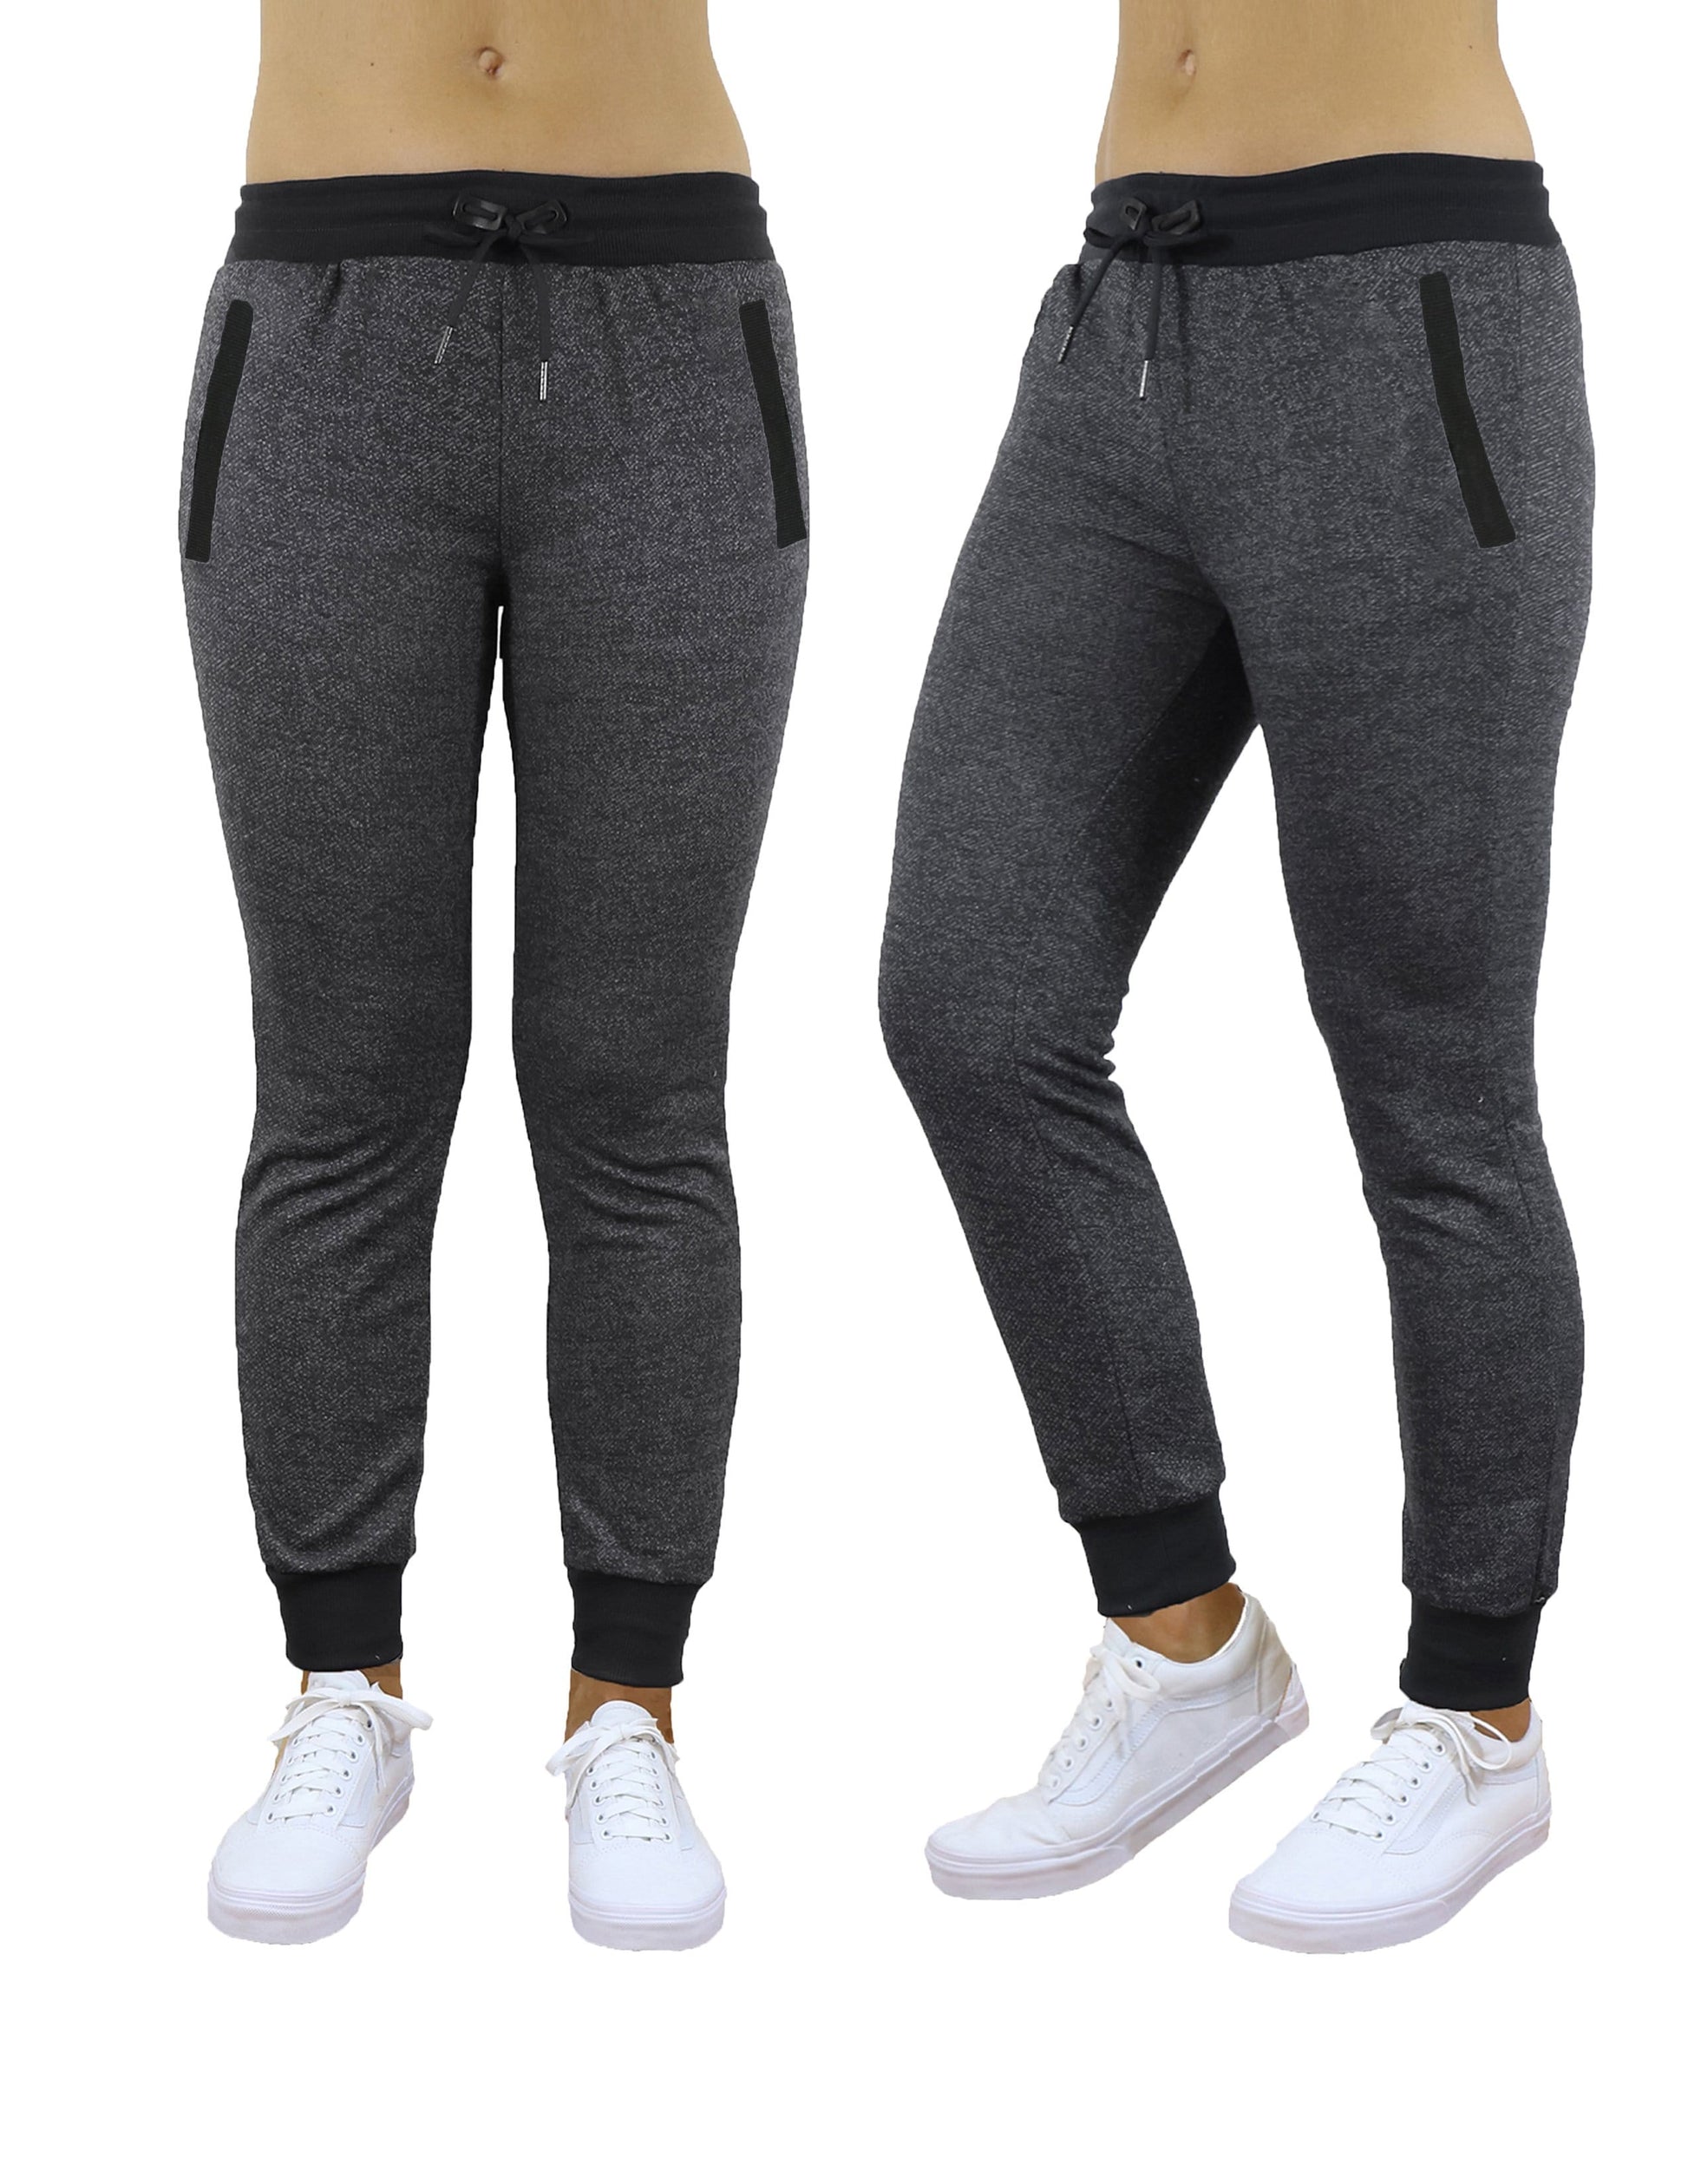 Women's Slim-Fit French-Terry Jogger Sweatpants